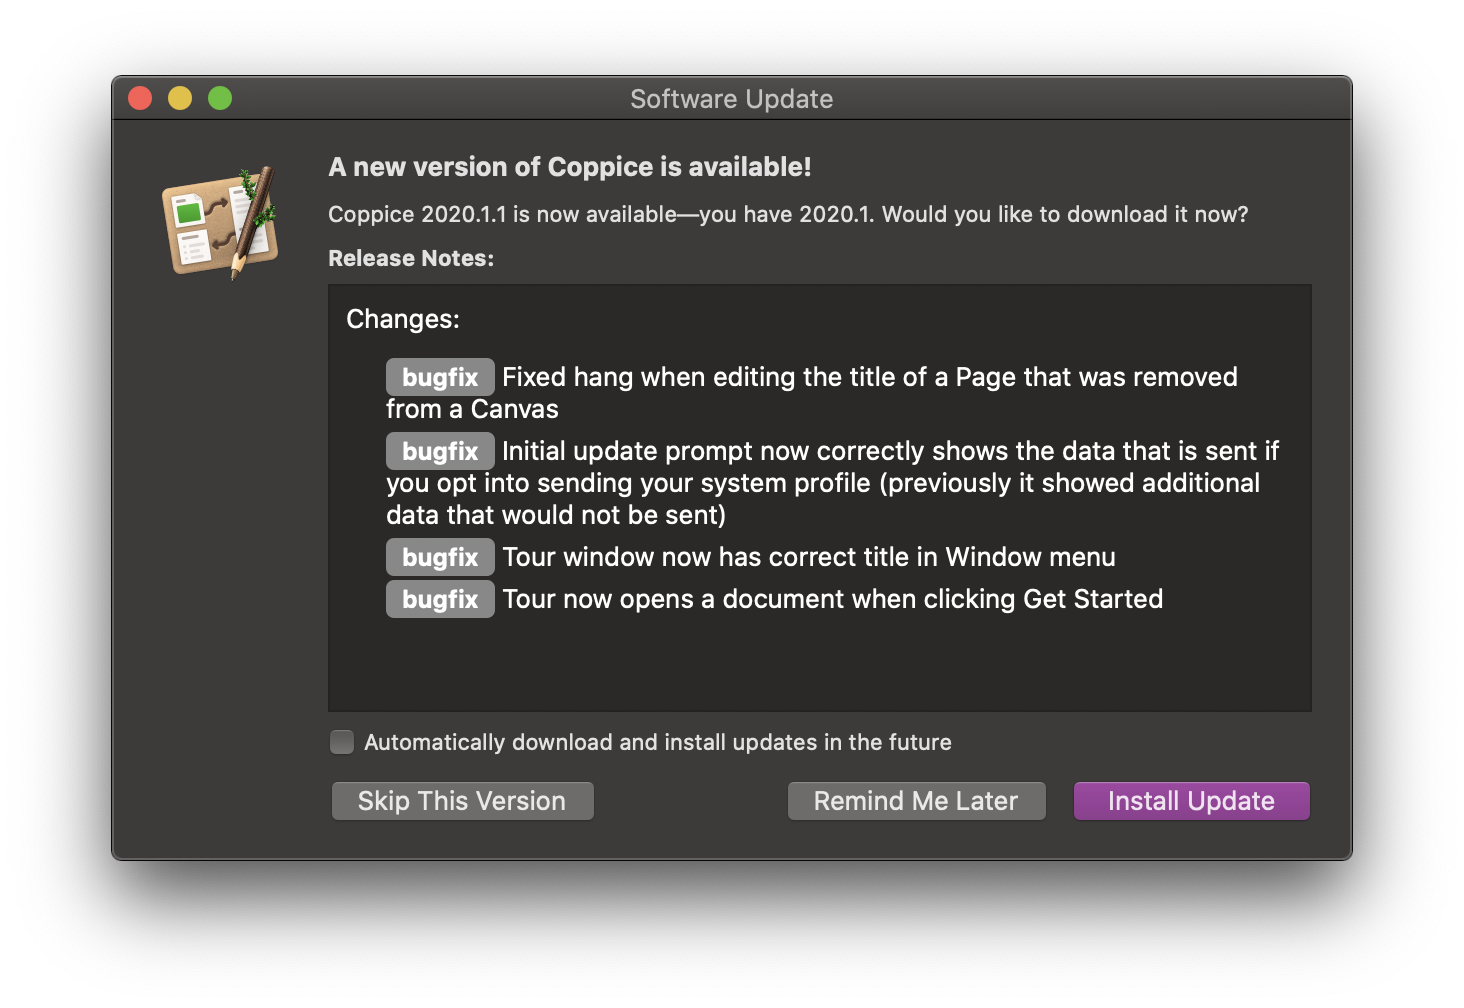 A standard Sparkle Software Update window running in Coppice. It has a title 'A new version of Coppice is available!', followed by text saying 'Coppice 2020.1.1 is now available–you have 2020.1. Would you like to download it now?'. Below are release notes followed by buttons to 'Skip this version', 'Remind me later', or 'Install Update' (which is the focused button)